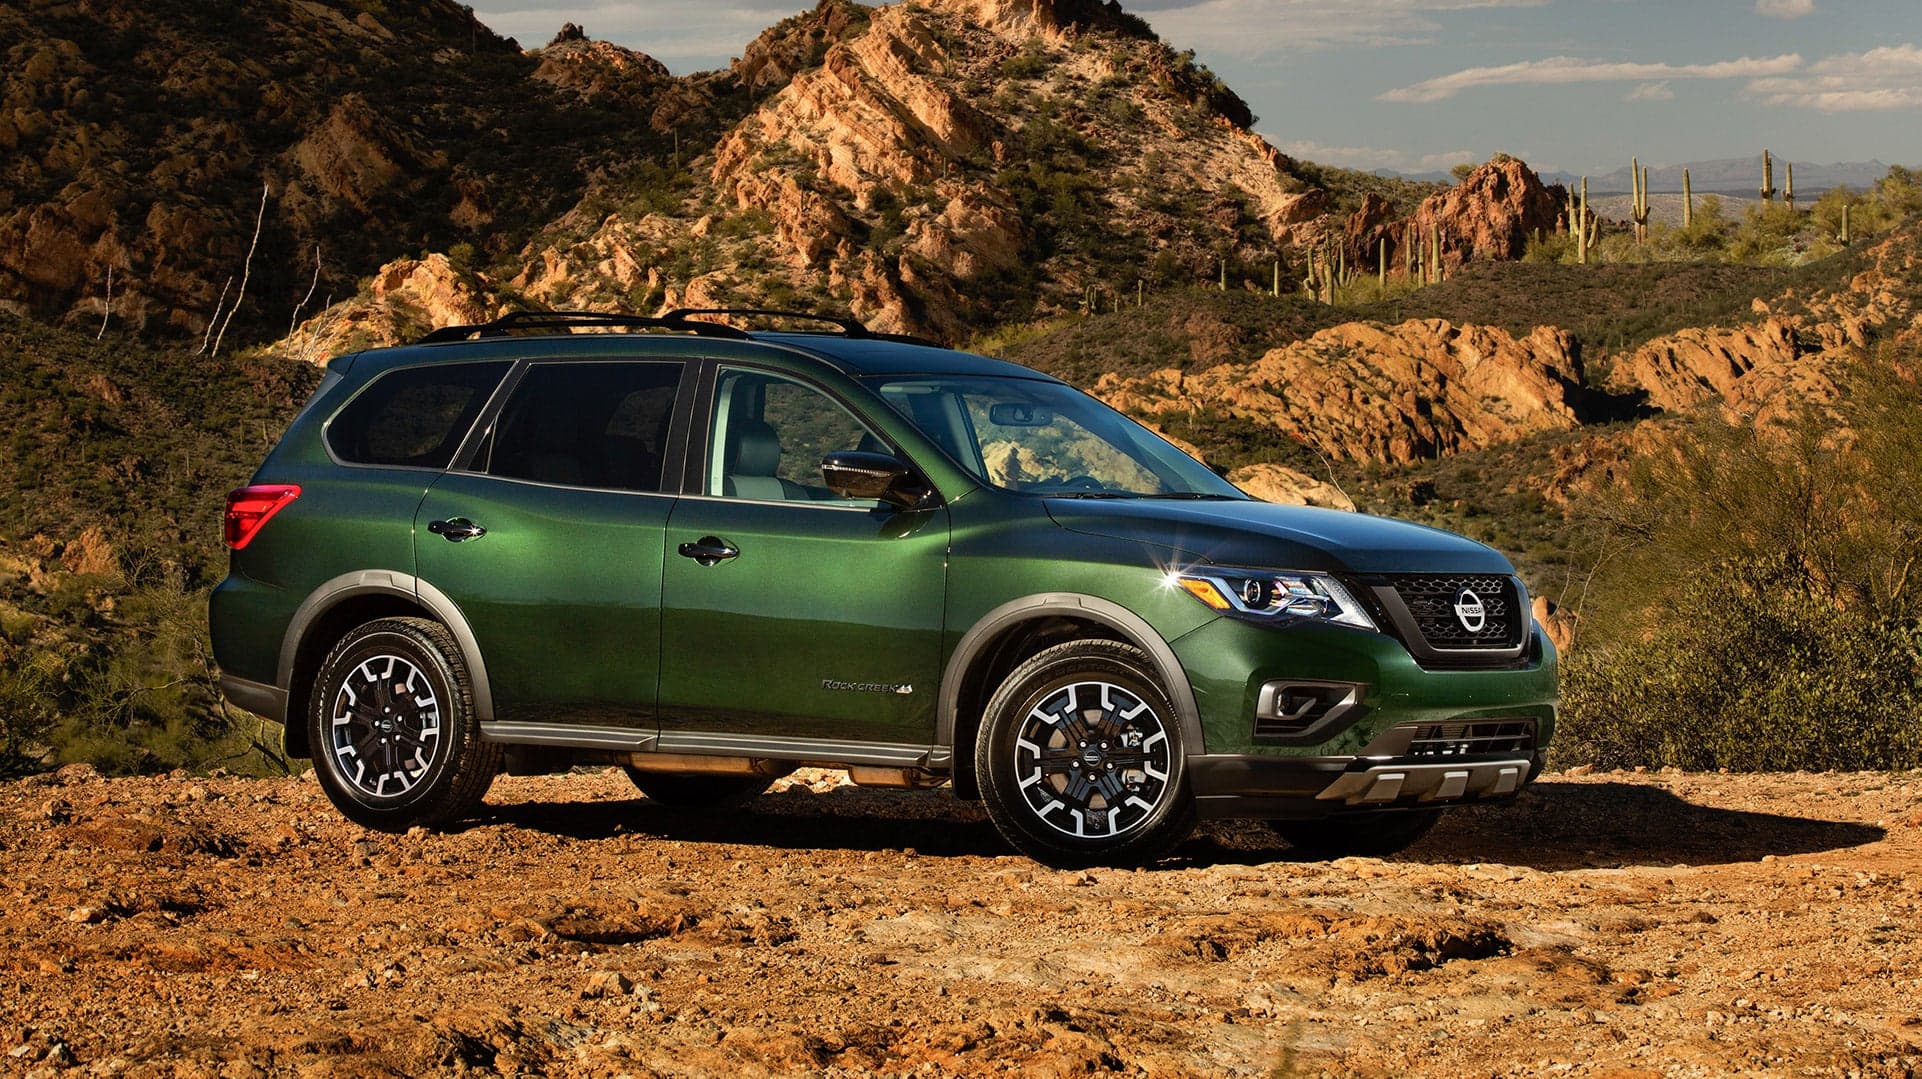 2019 Nissan Pathfinder Gets Outdoorsy With New Rock Creek Edition